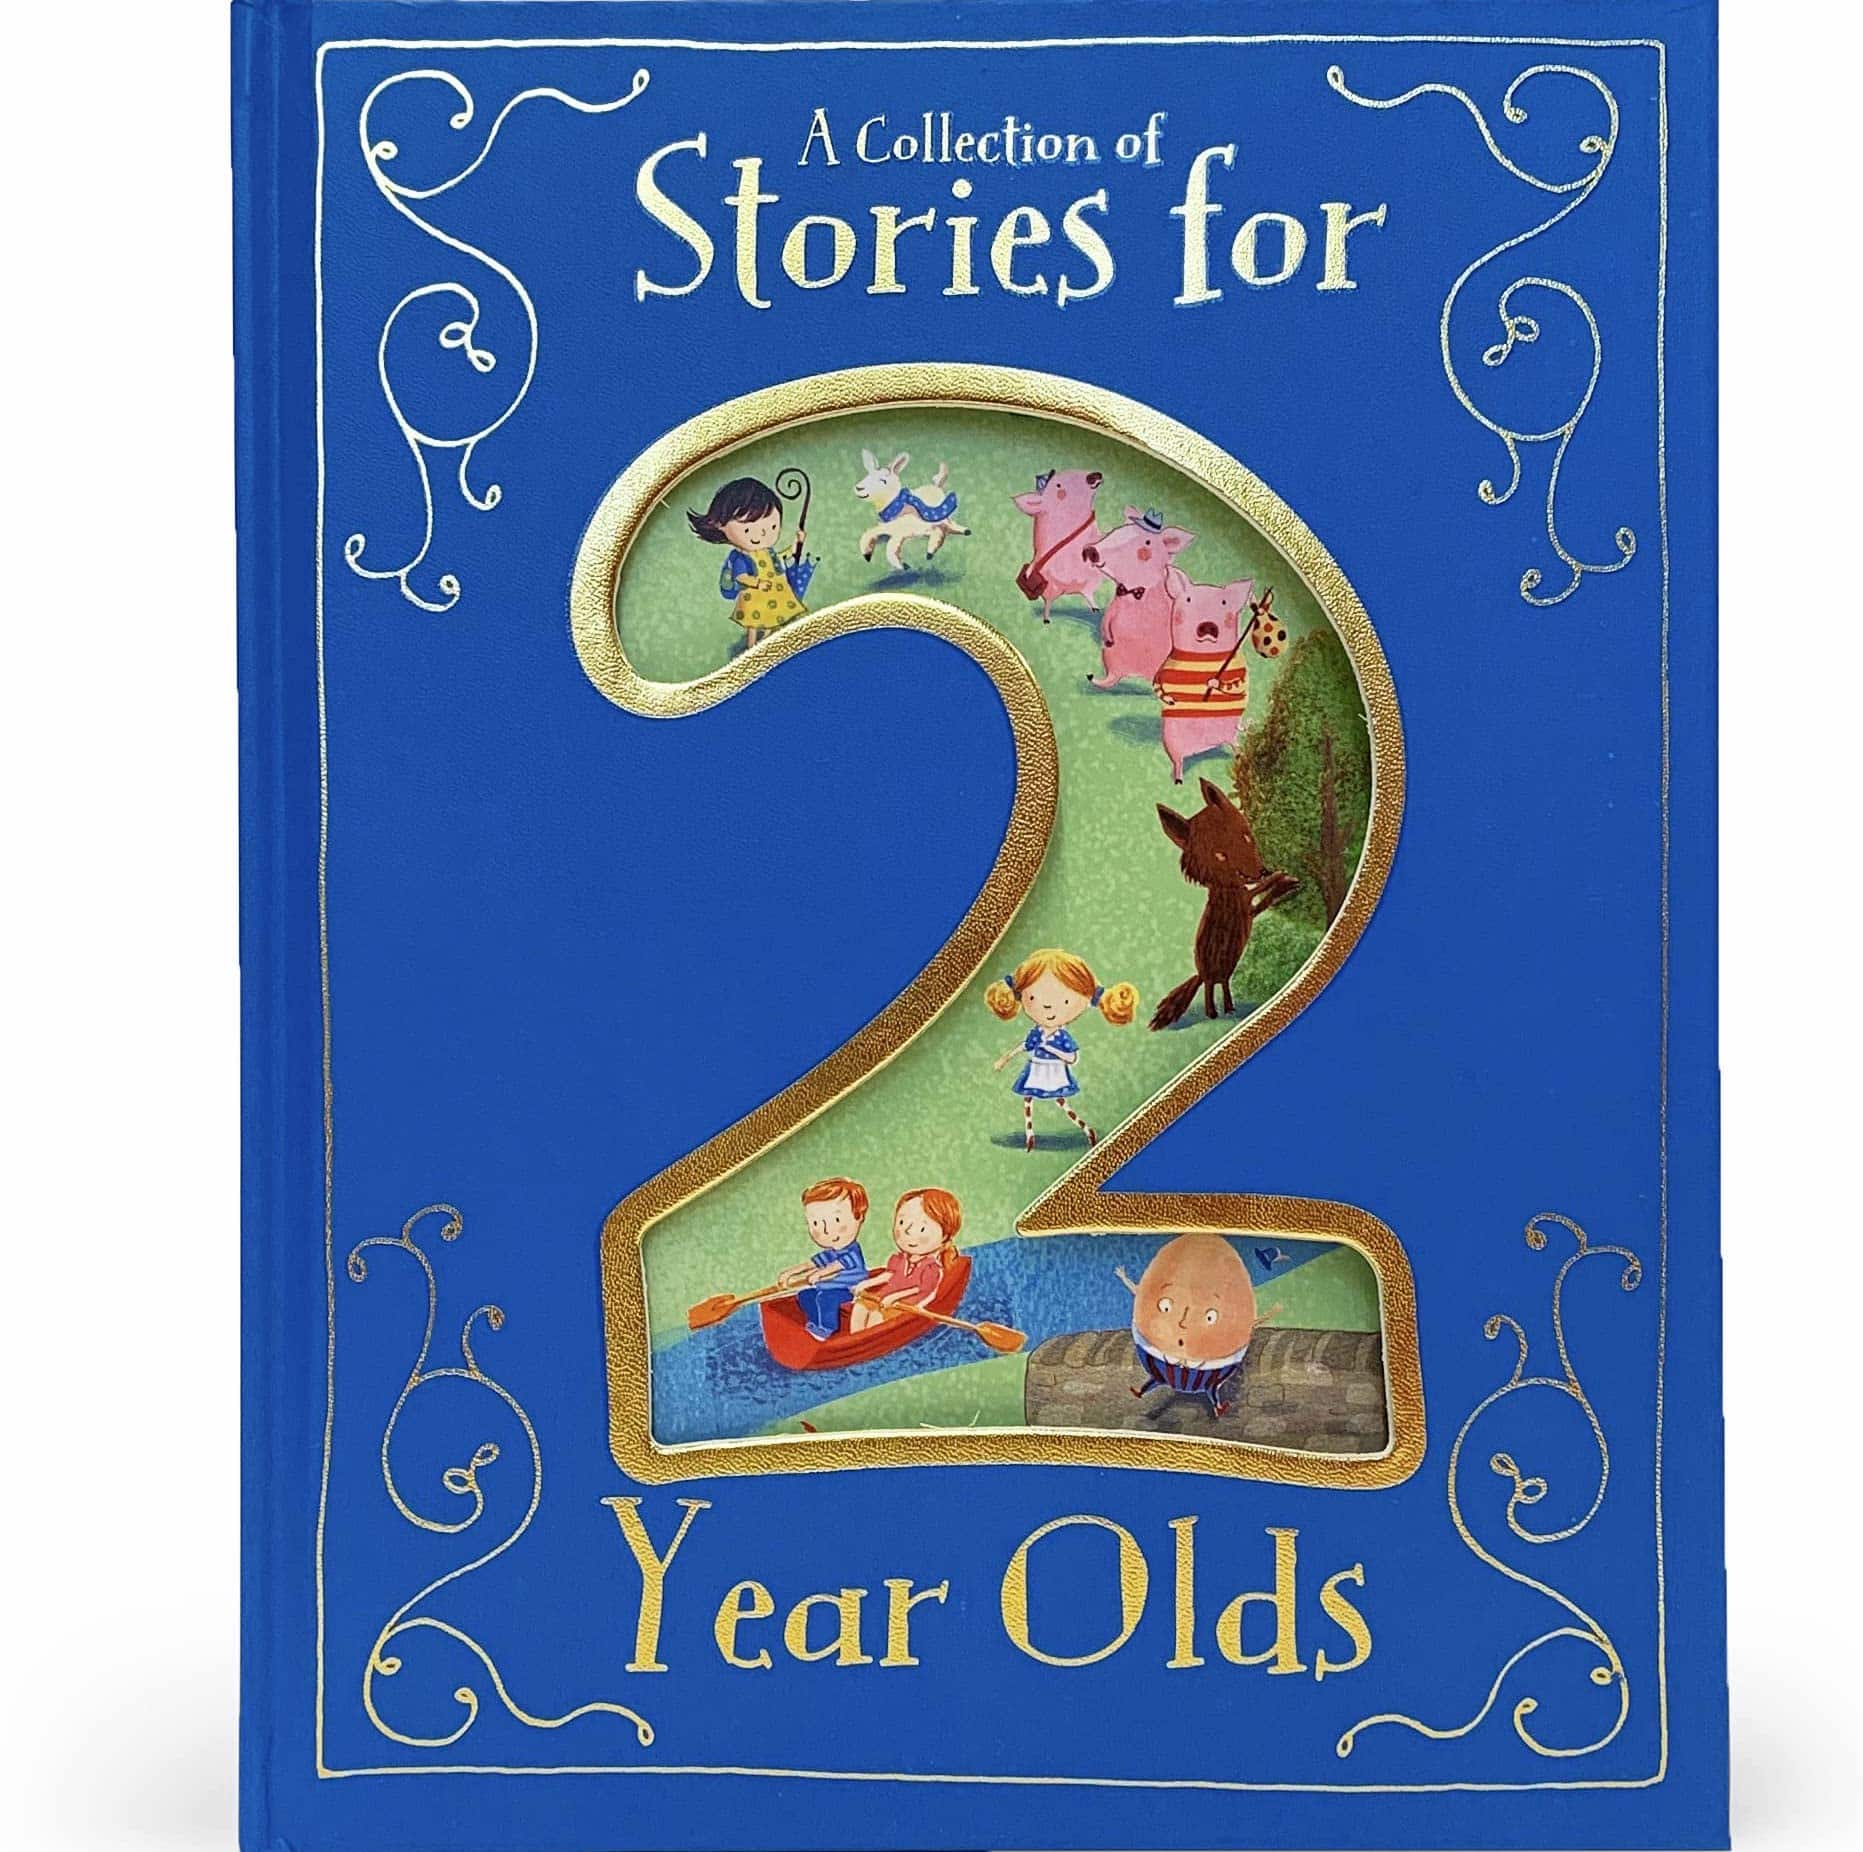 A Collection of Stories for 2 Year Olds book 